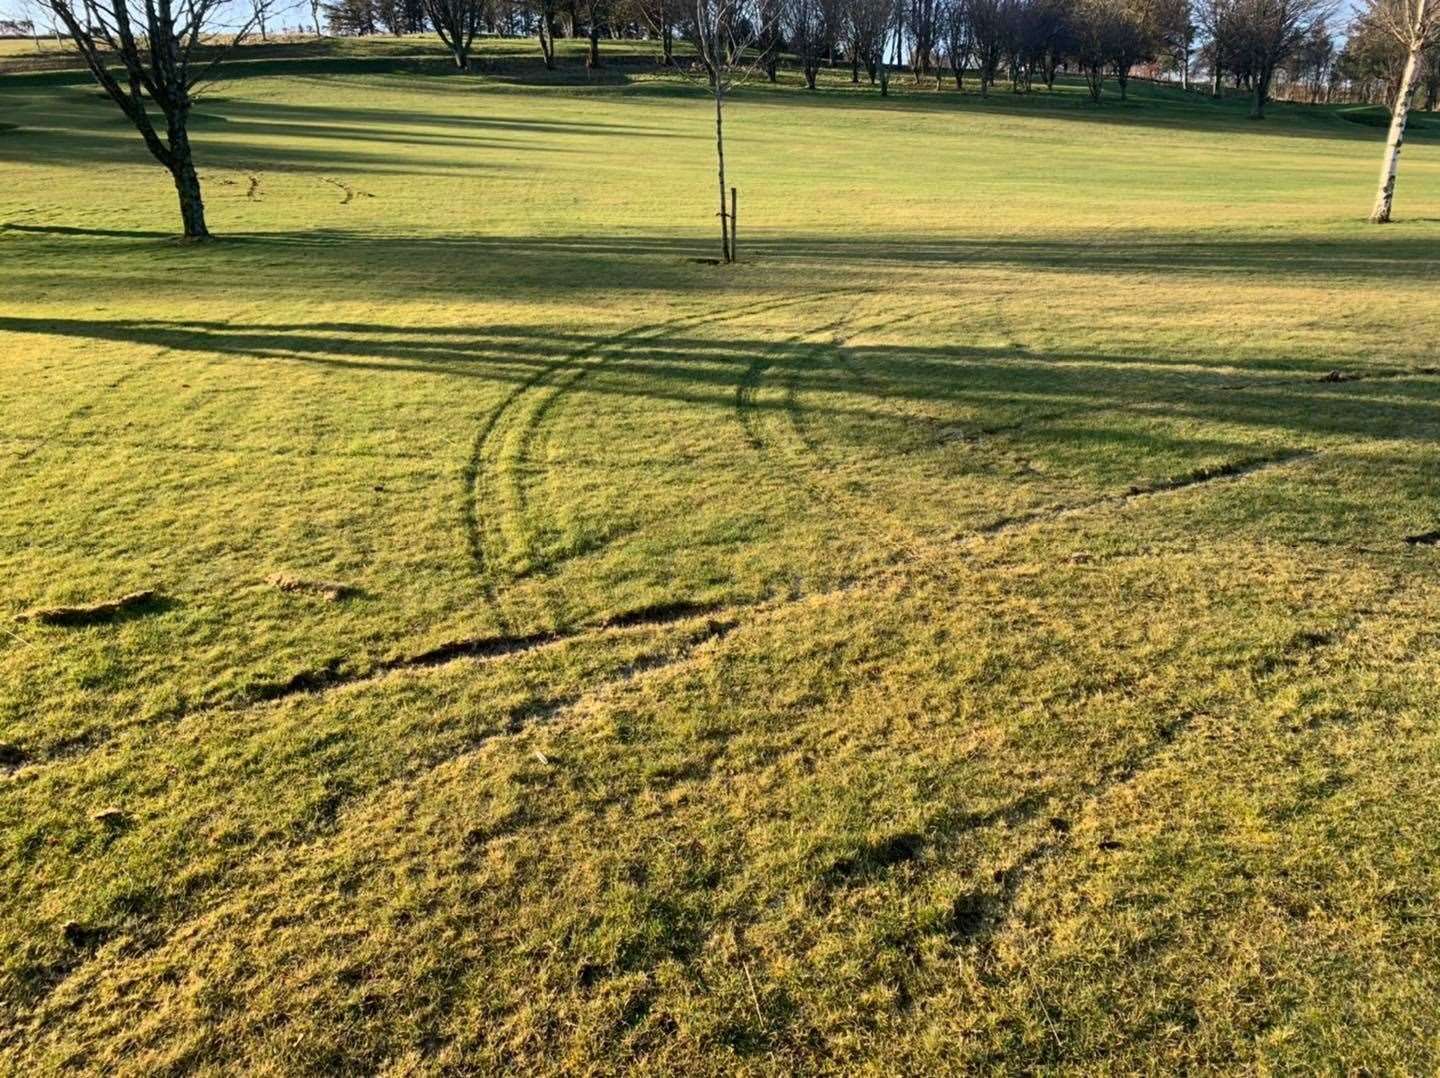 Damage was done to the 10th green and part of the course at Turriff